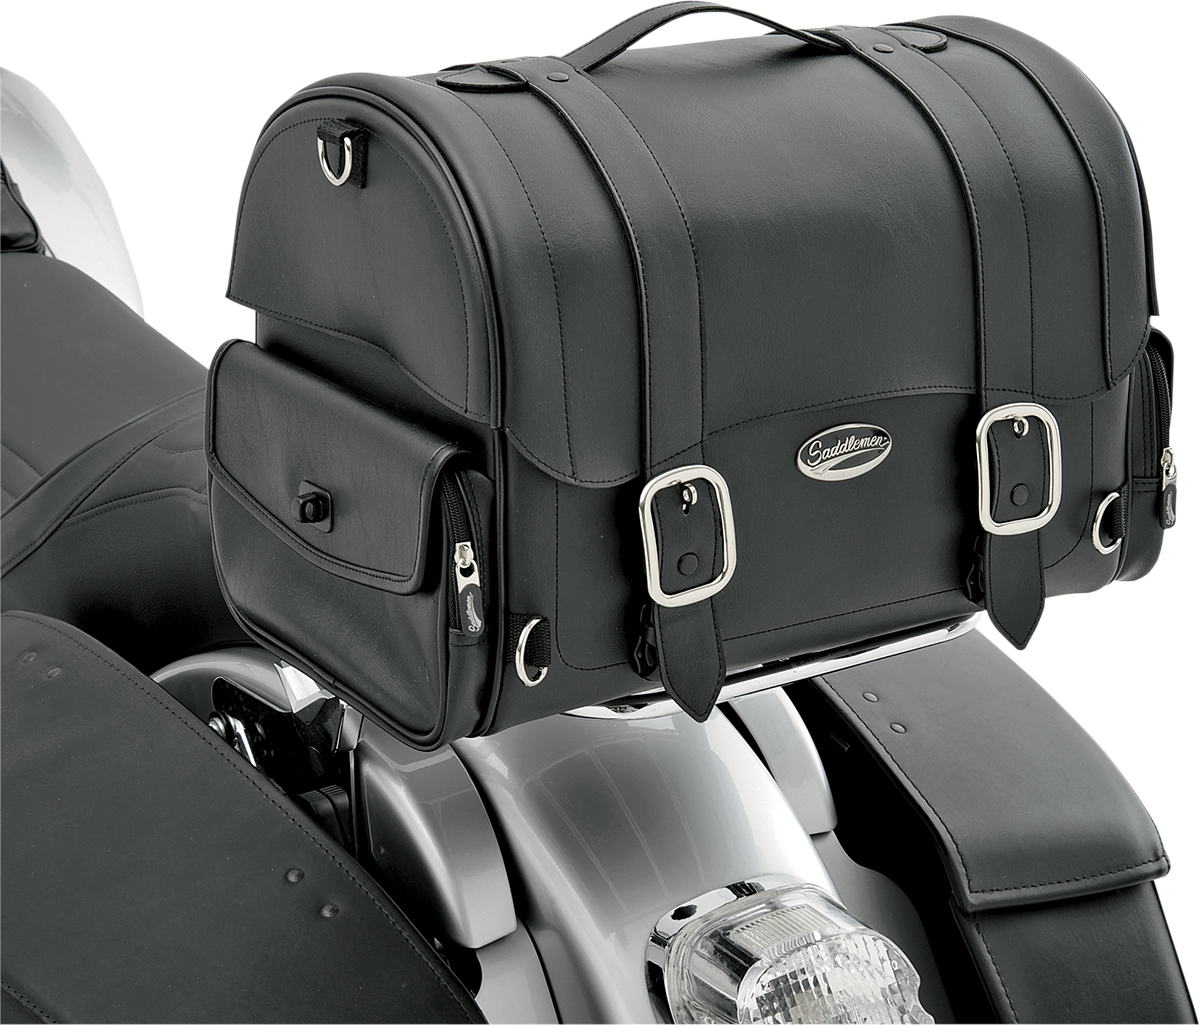 Harley Davidson Luggage Bags Promotion Off64